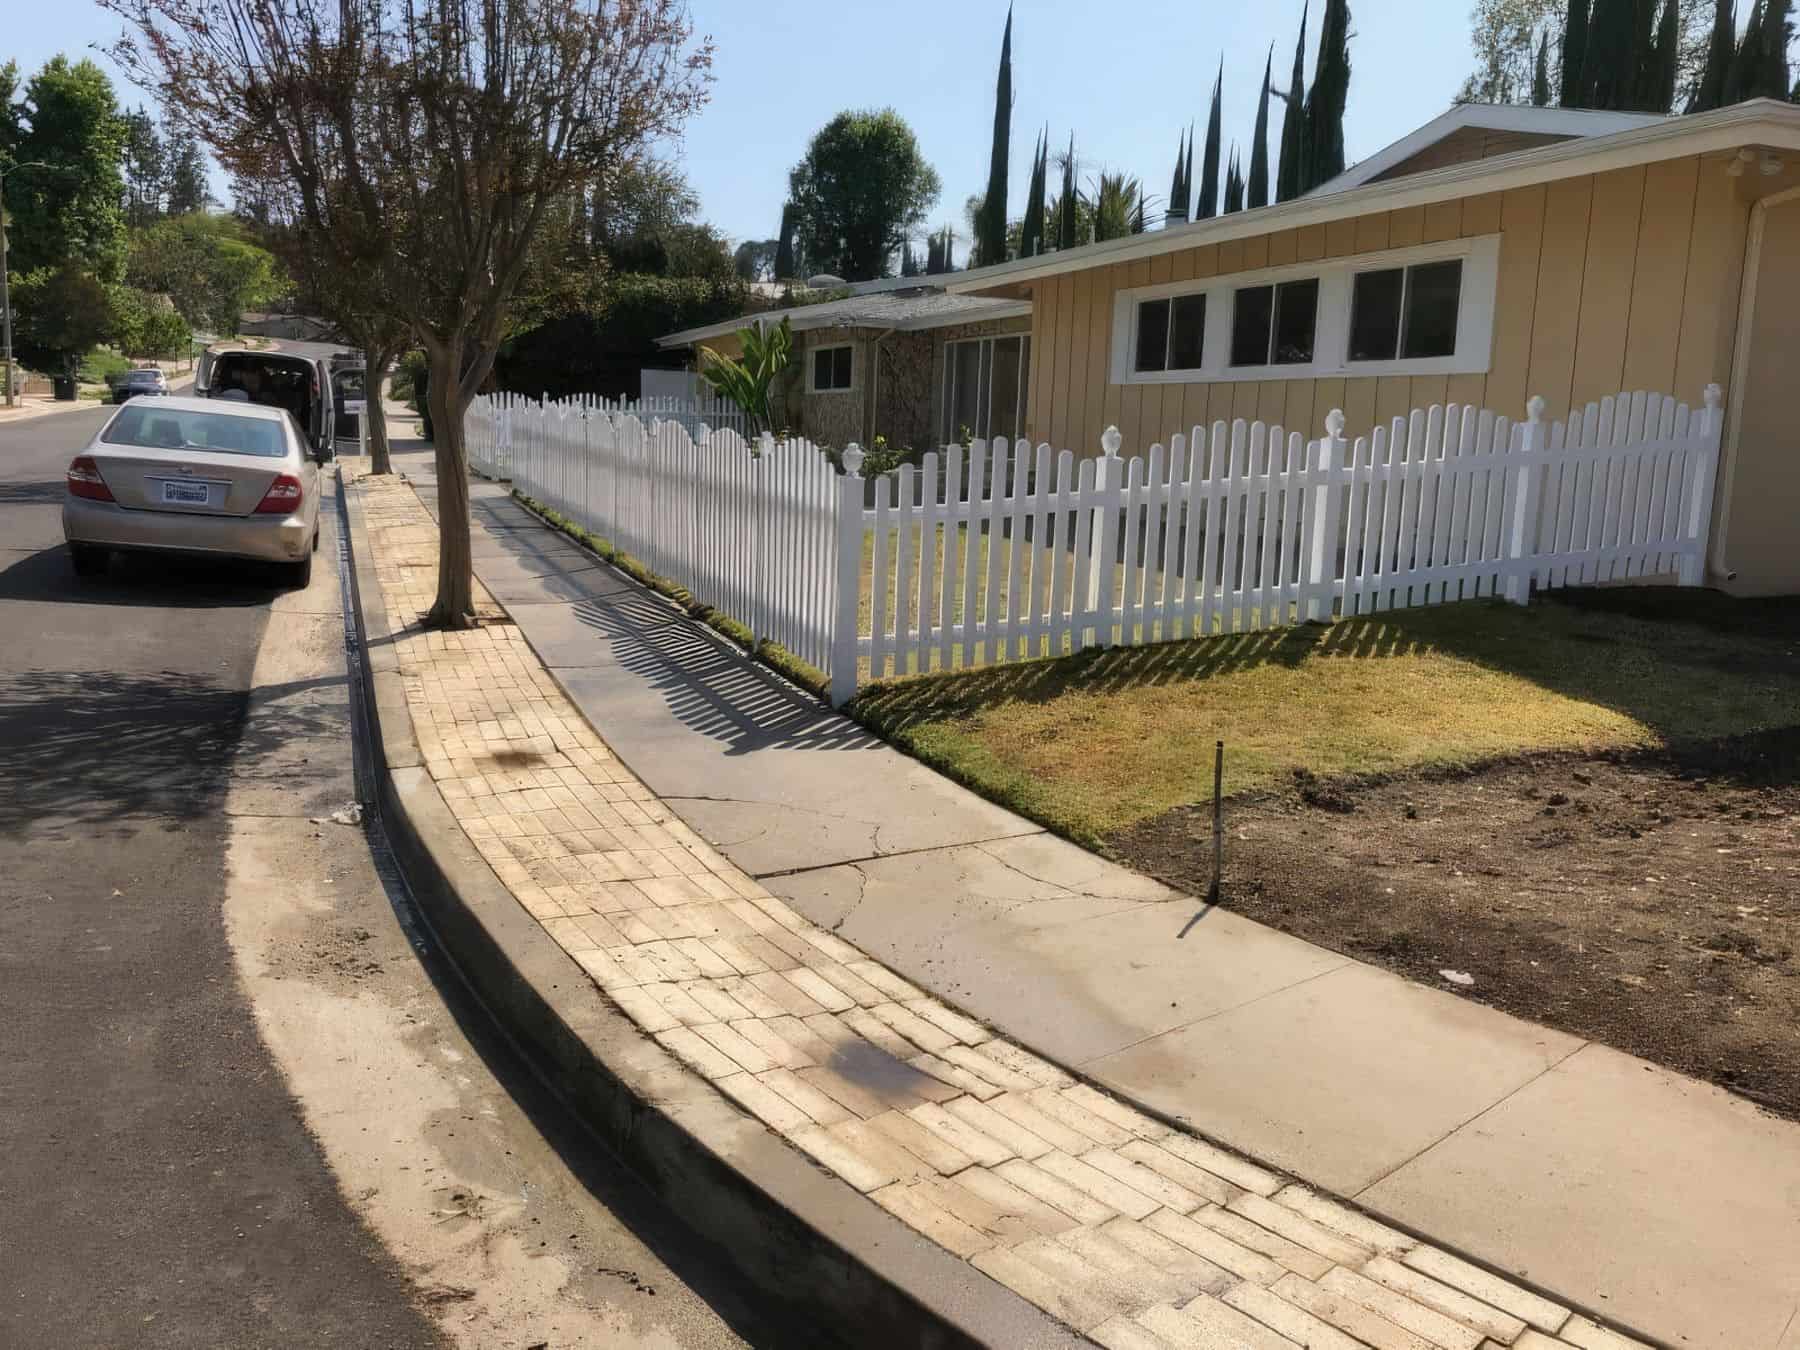 Vinyl arched picket fence surrounds small garden, trees in background & concrete sidewalk add charm to the scene.